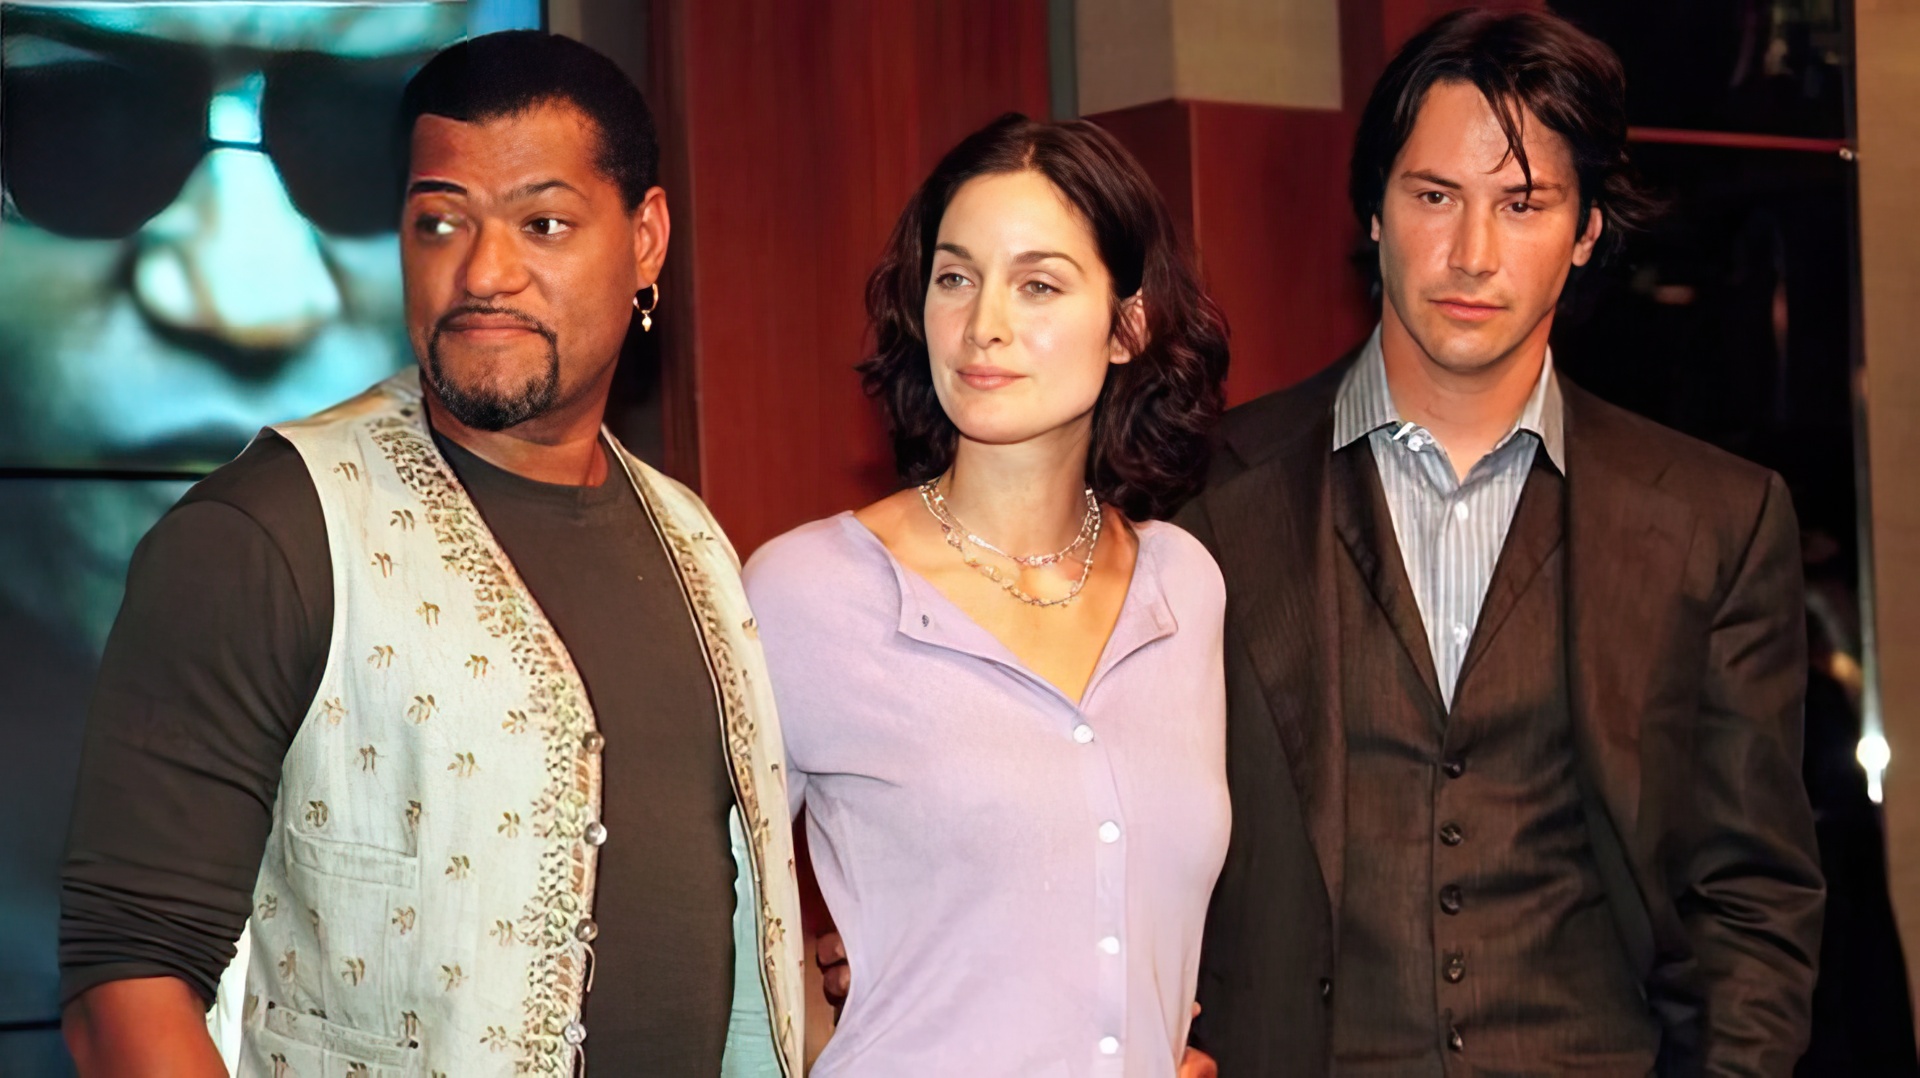 Laurence Fishburne, Carrie-Anne Moss, and Keanu Reeves